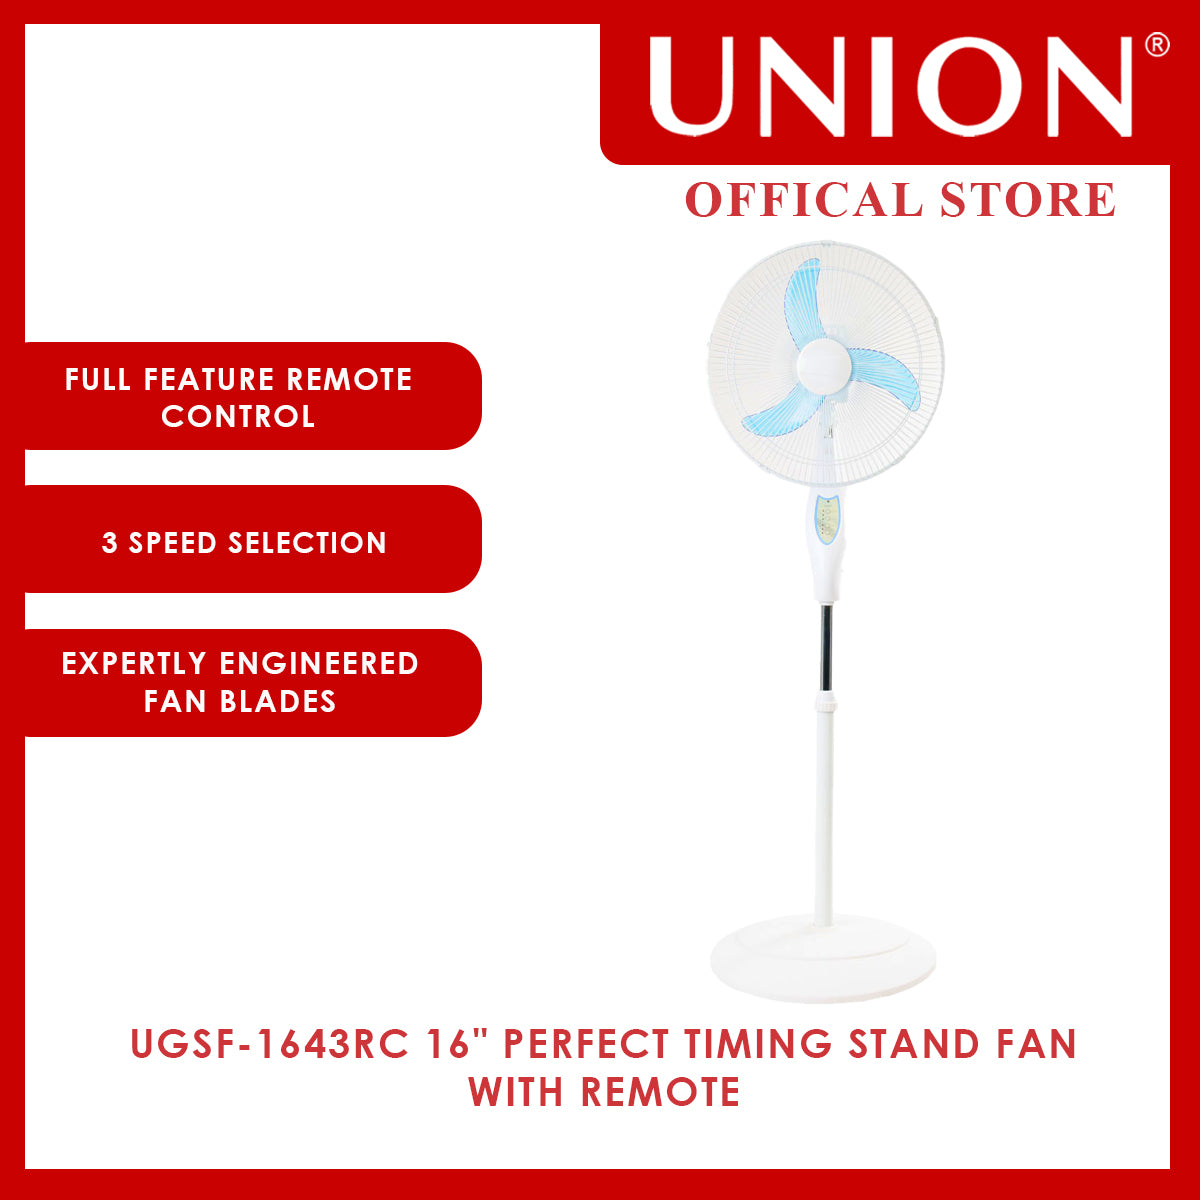 Union®16" Perfect Timing Stand Fan